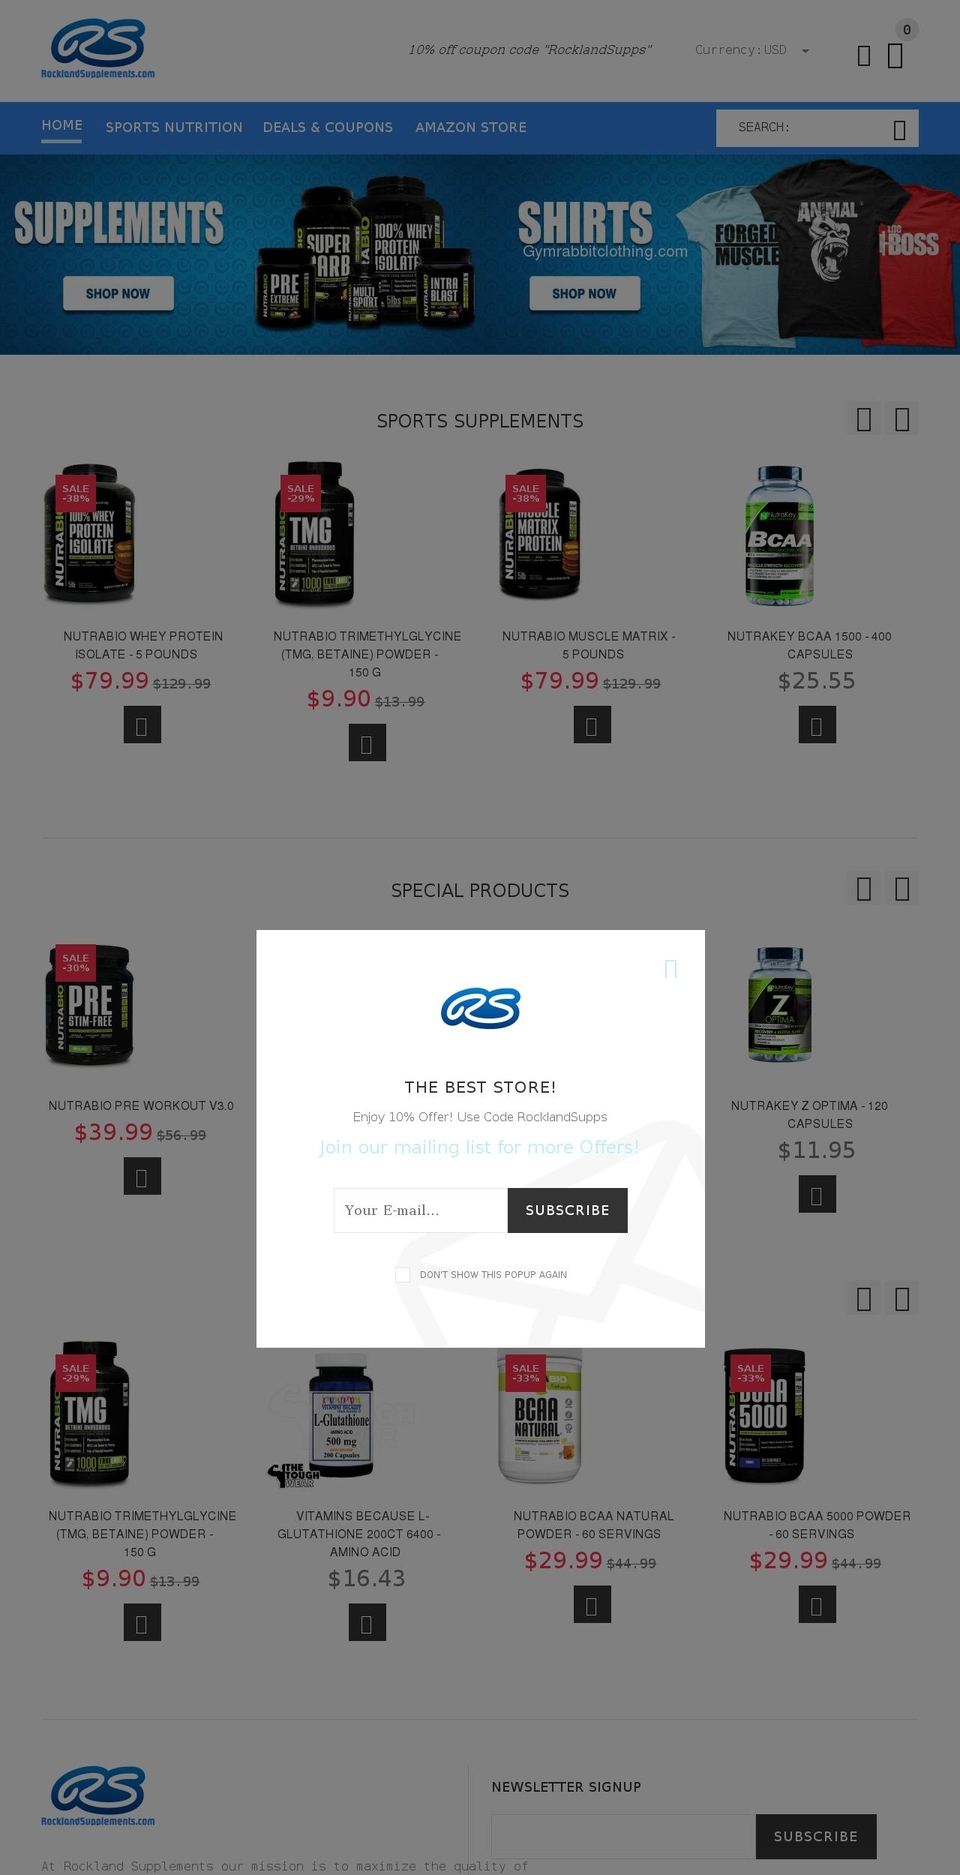 yourstore-v2-1-3 Shopify theme site example rocklandsupplements.com